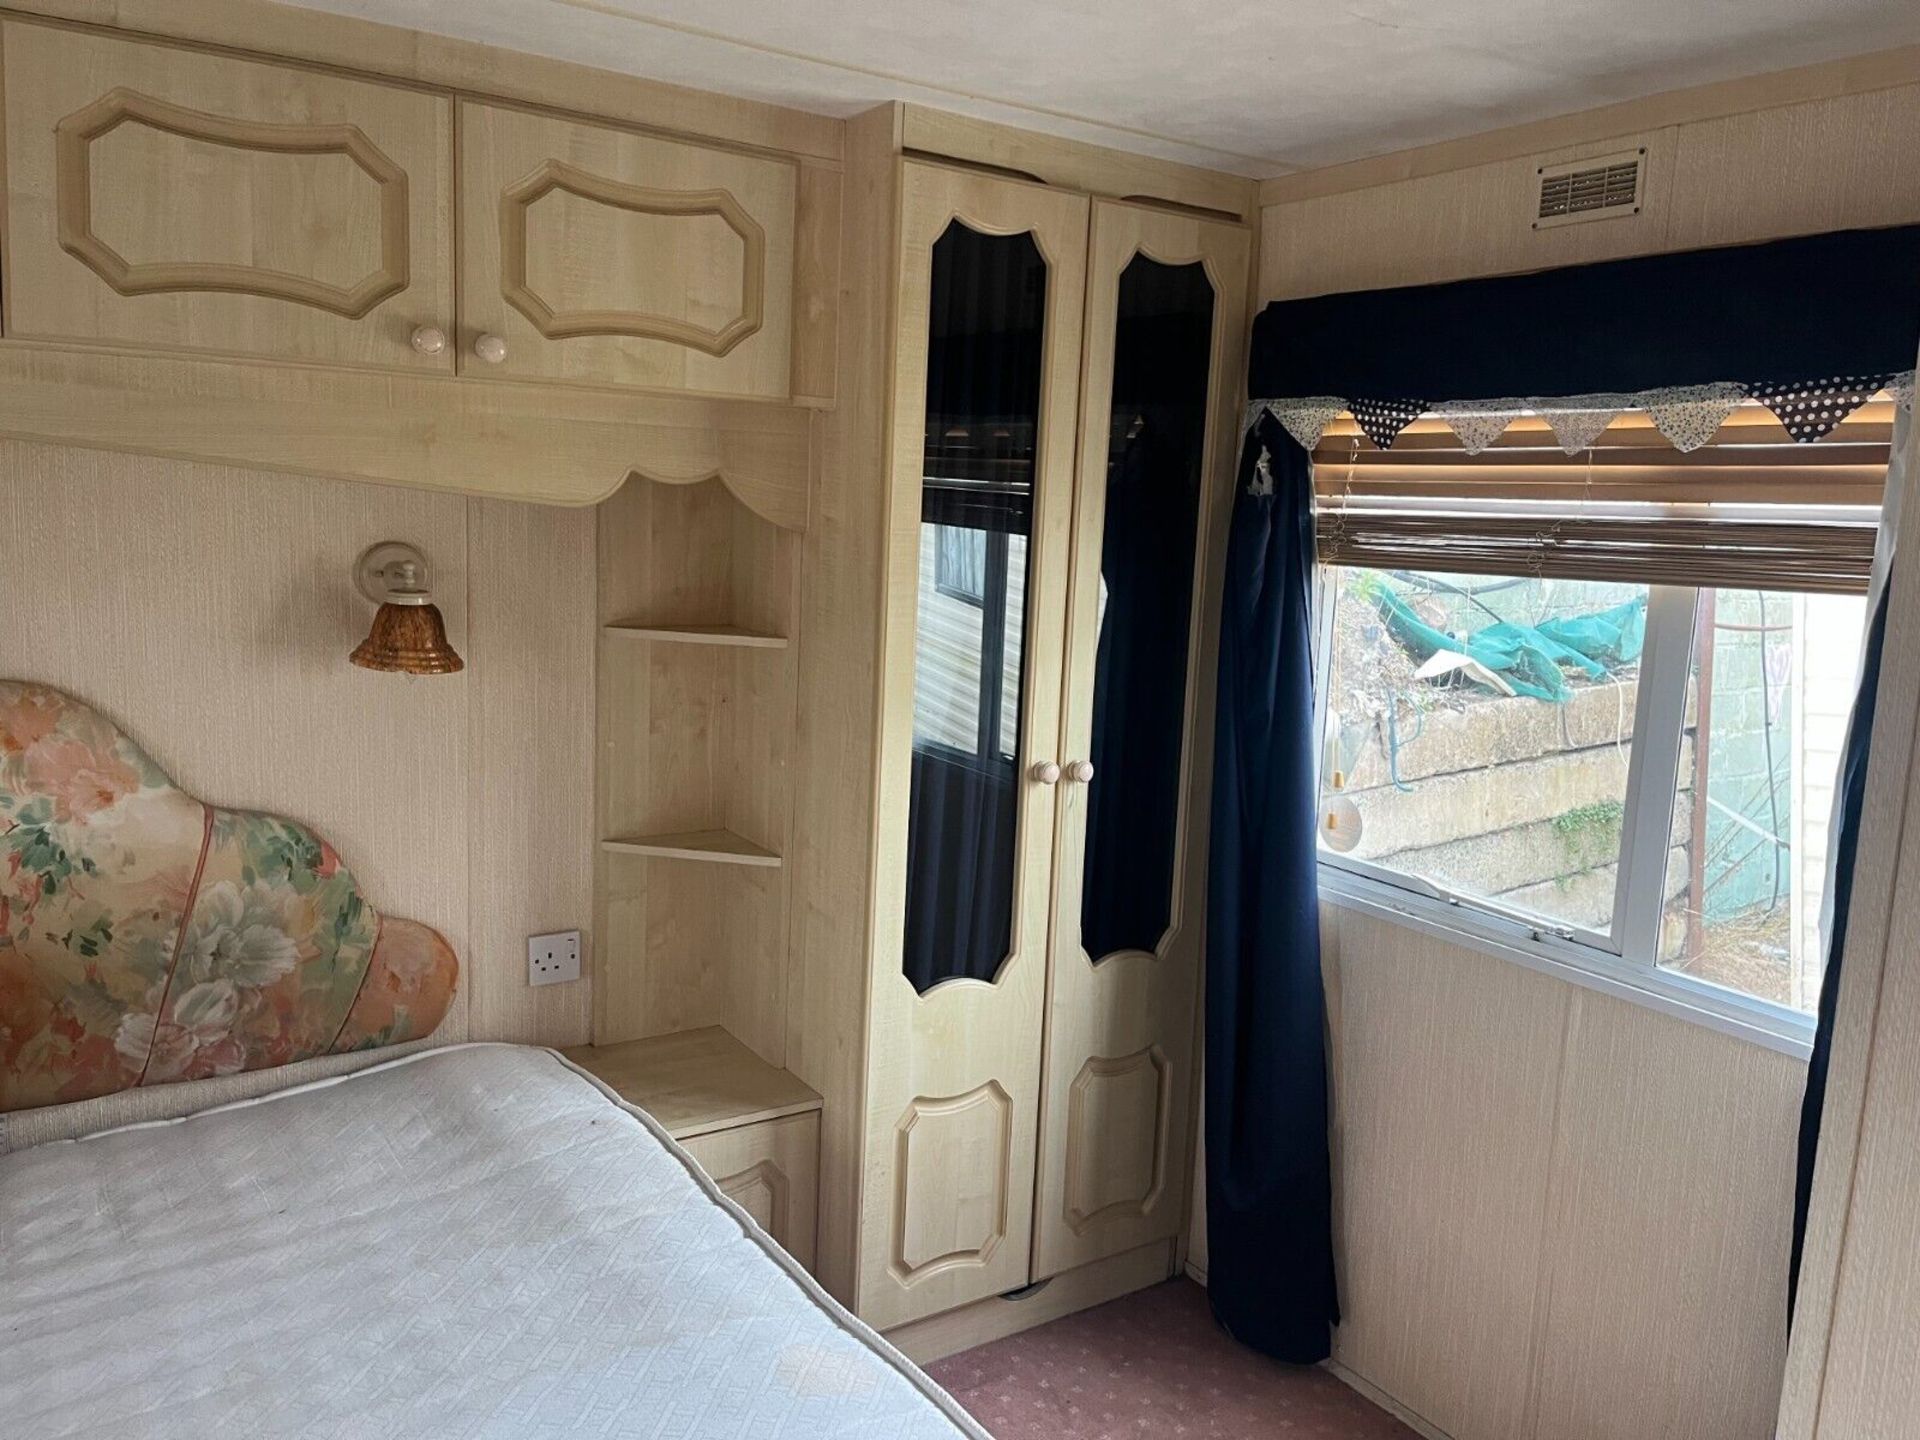 WILLERBY 35 FT X 12 FT STATIC CARAVAN 2 BED - Image 12 of 13